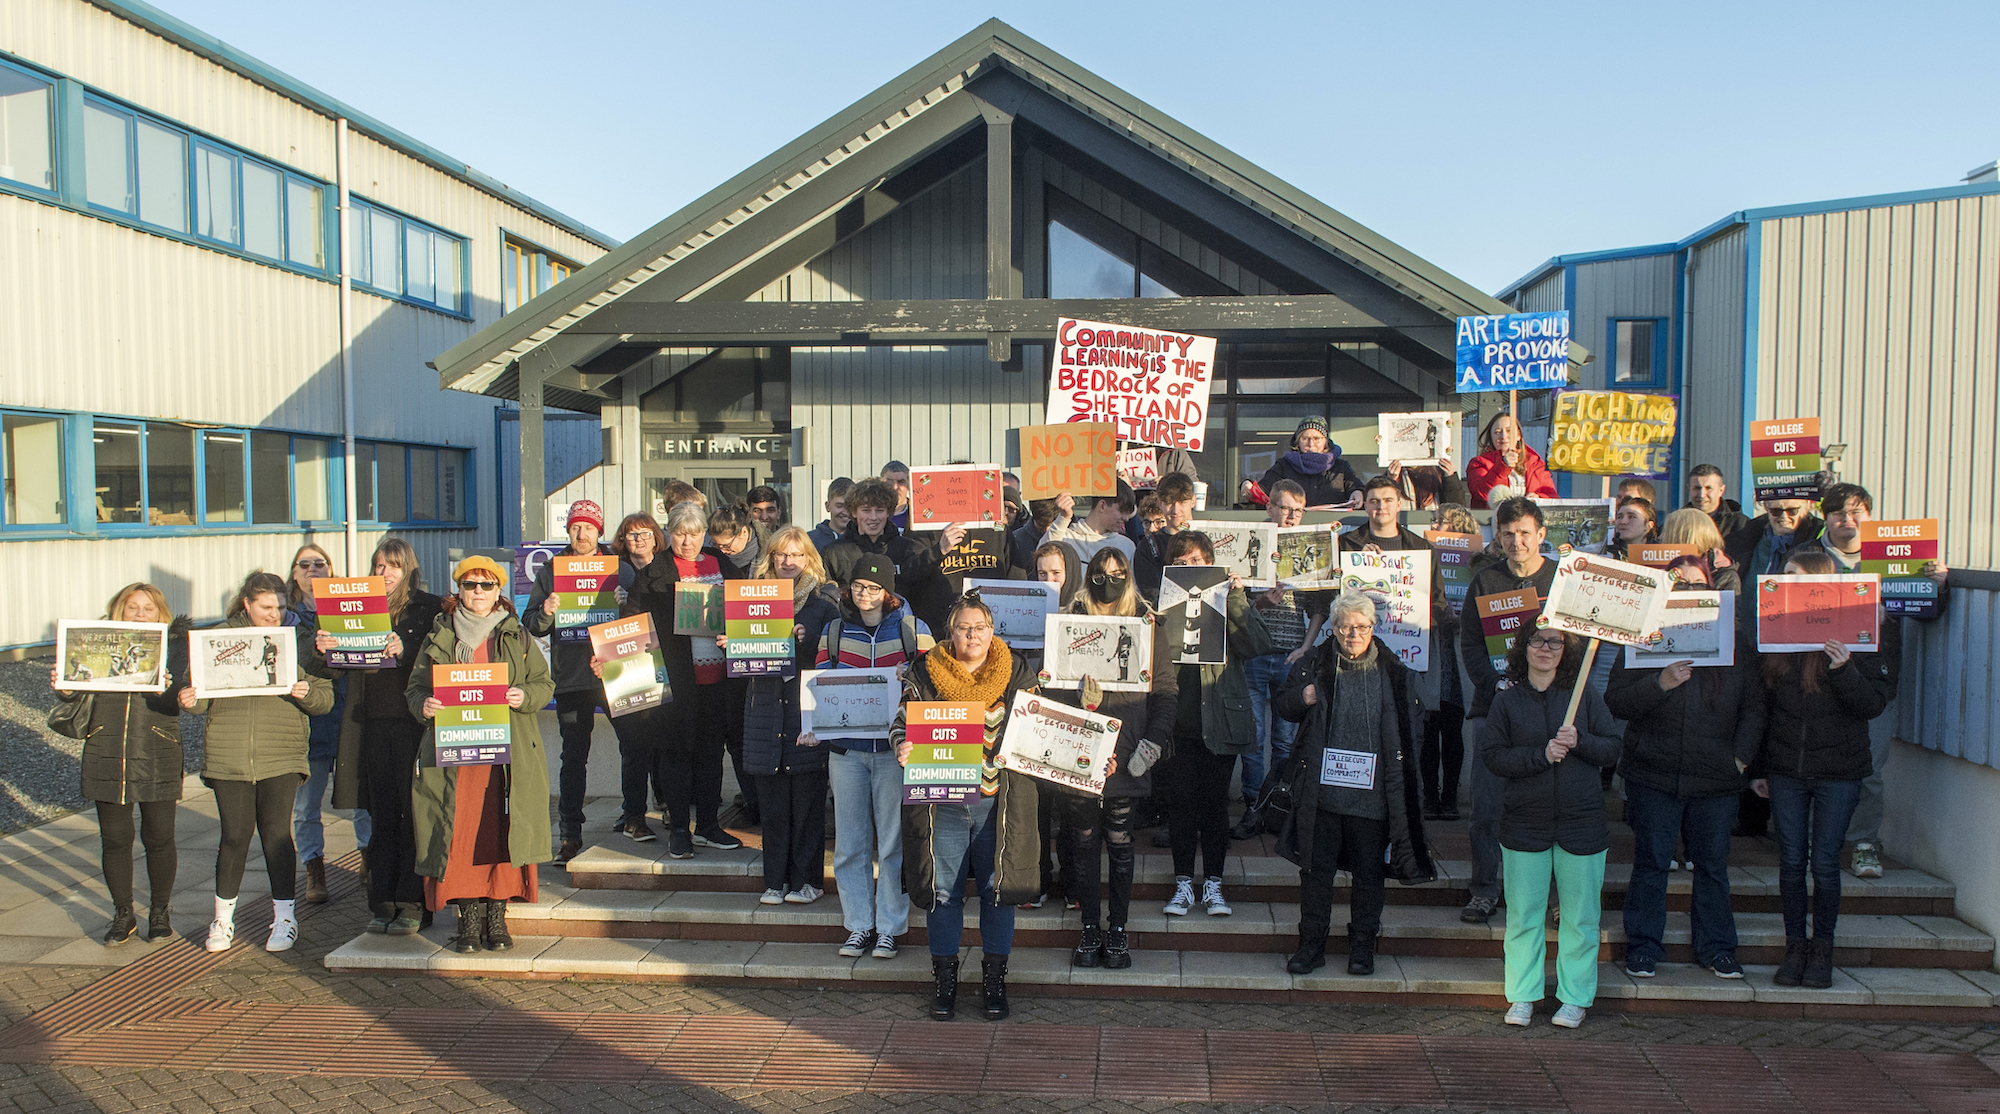 Could Shetland afford not to have community learning? Protesters don’t think so